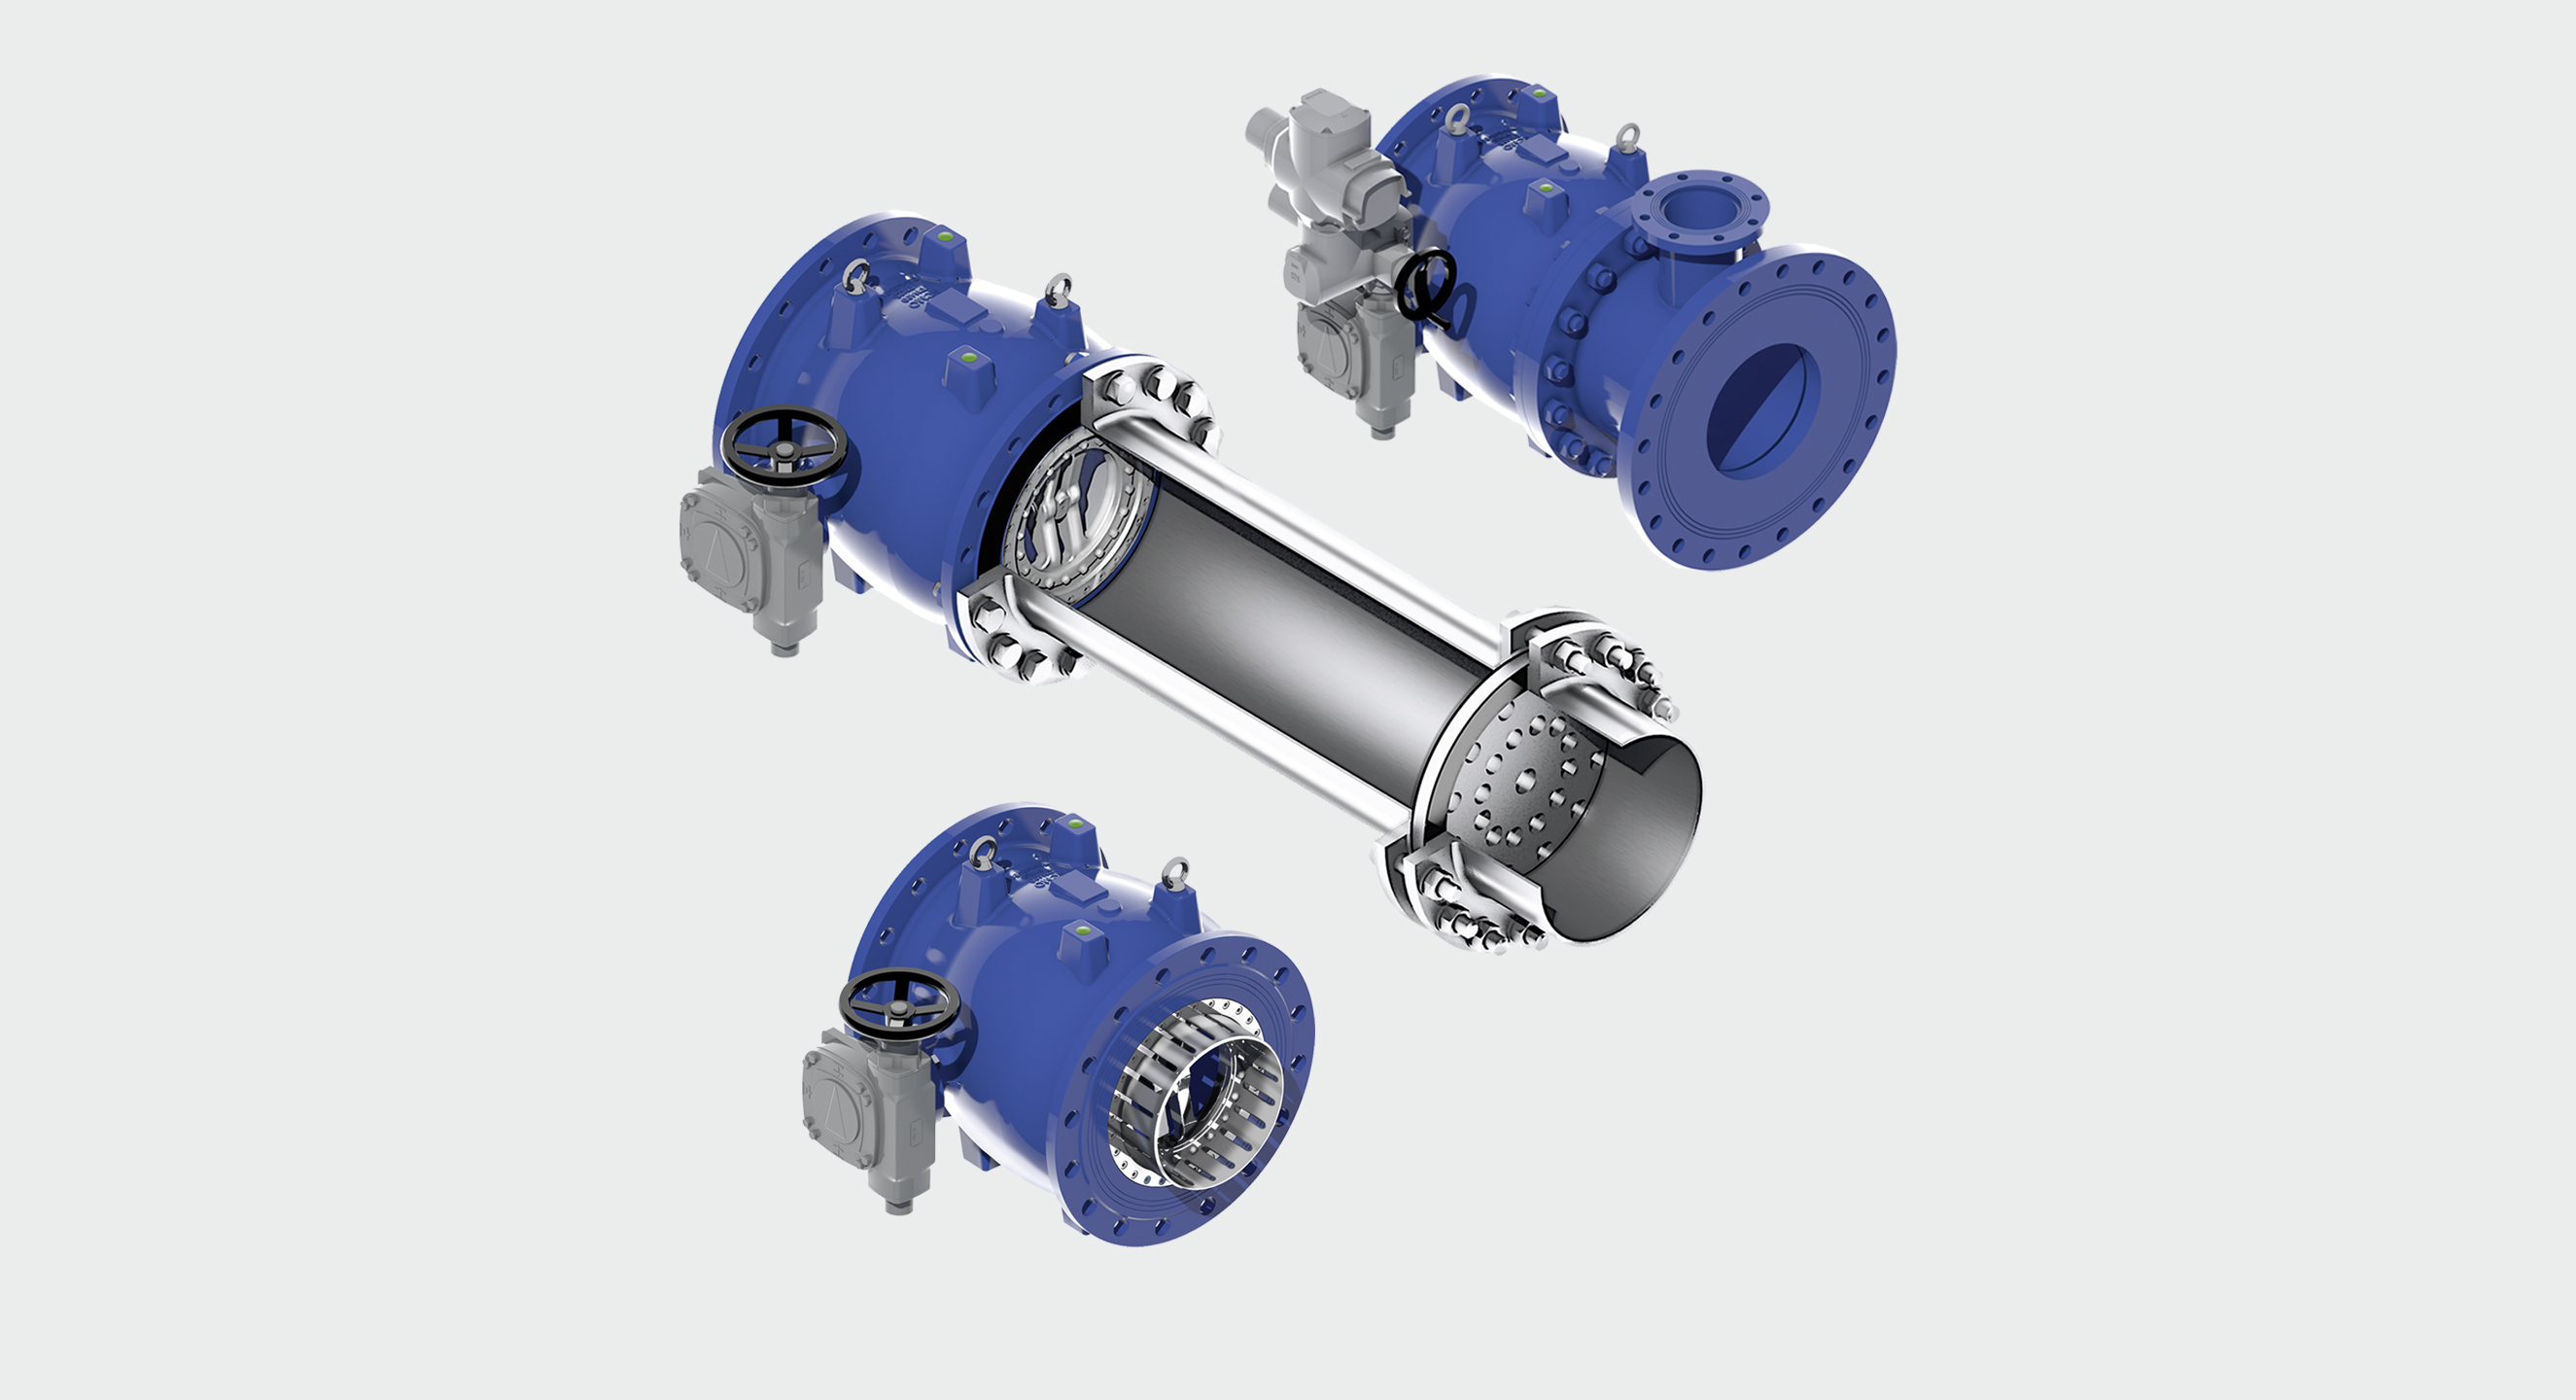 Accessories for needle valves or plunger valves are available for prevention of cavitation